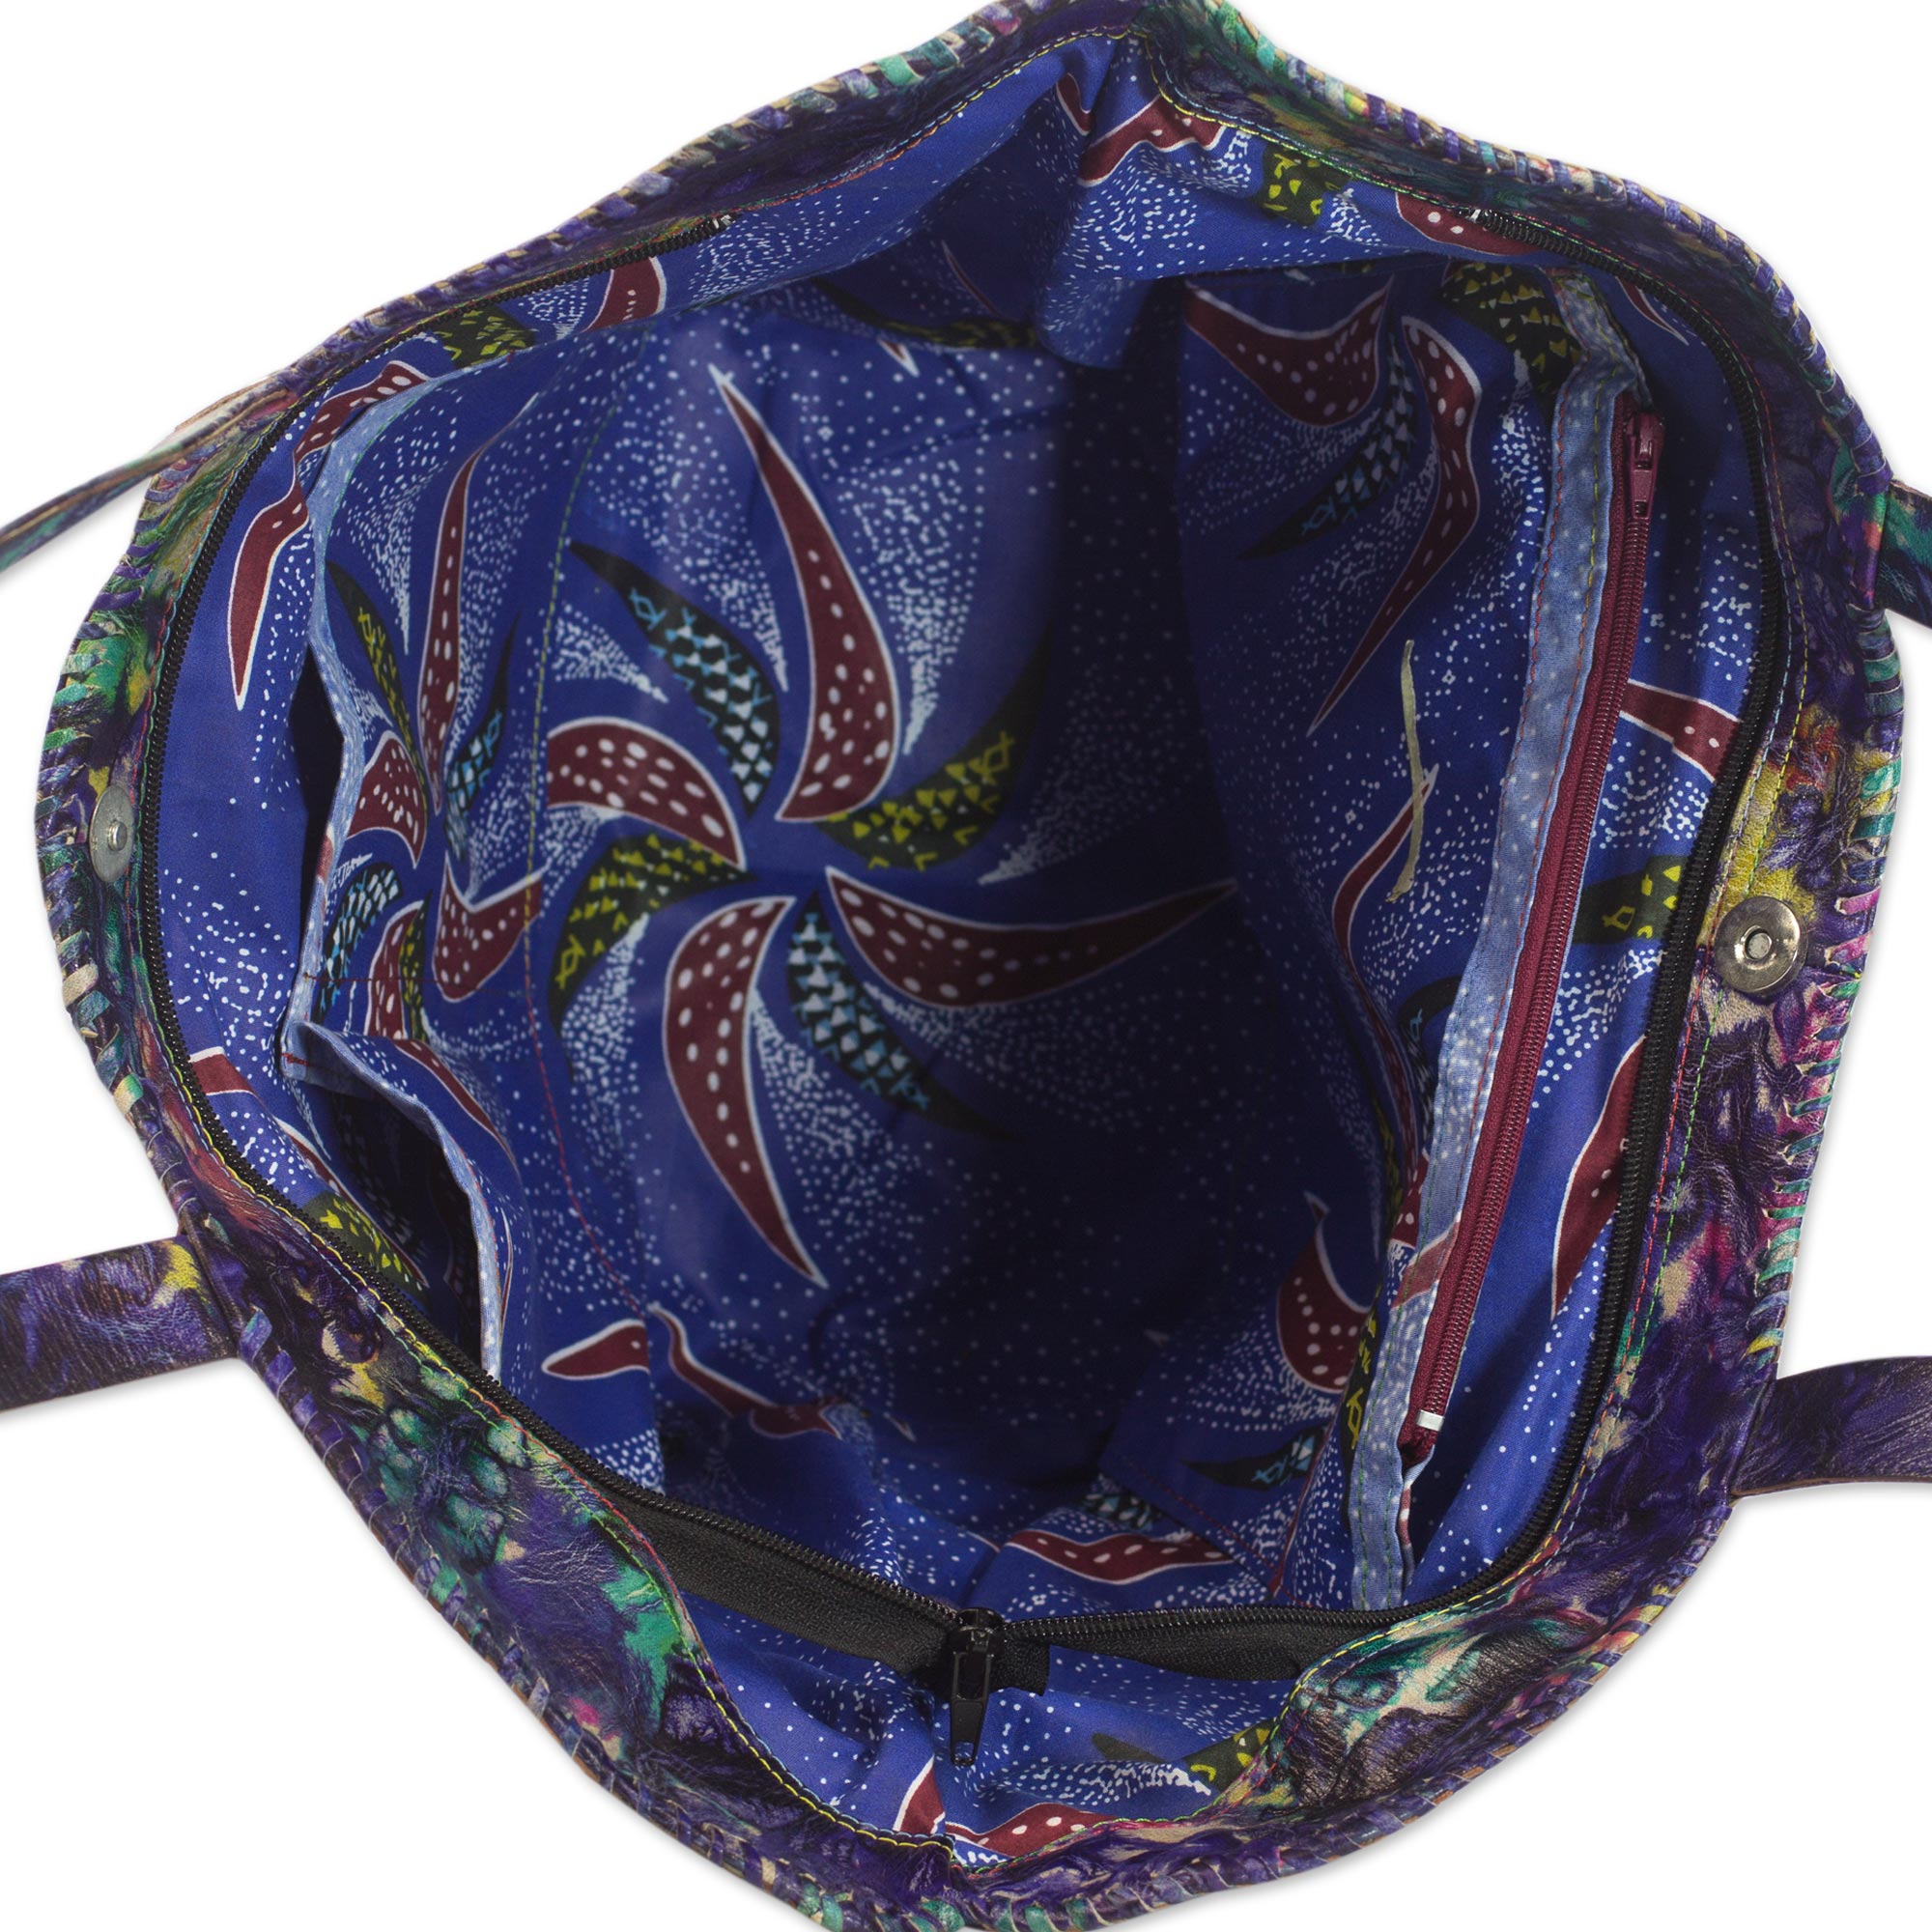 Handcrafted Tie-Dyed Leather Shoulder Bag from Ghana - Colorful Cosmos ...